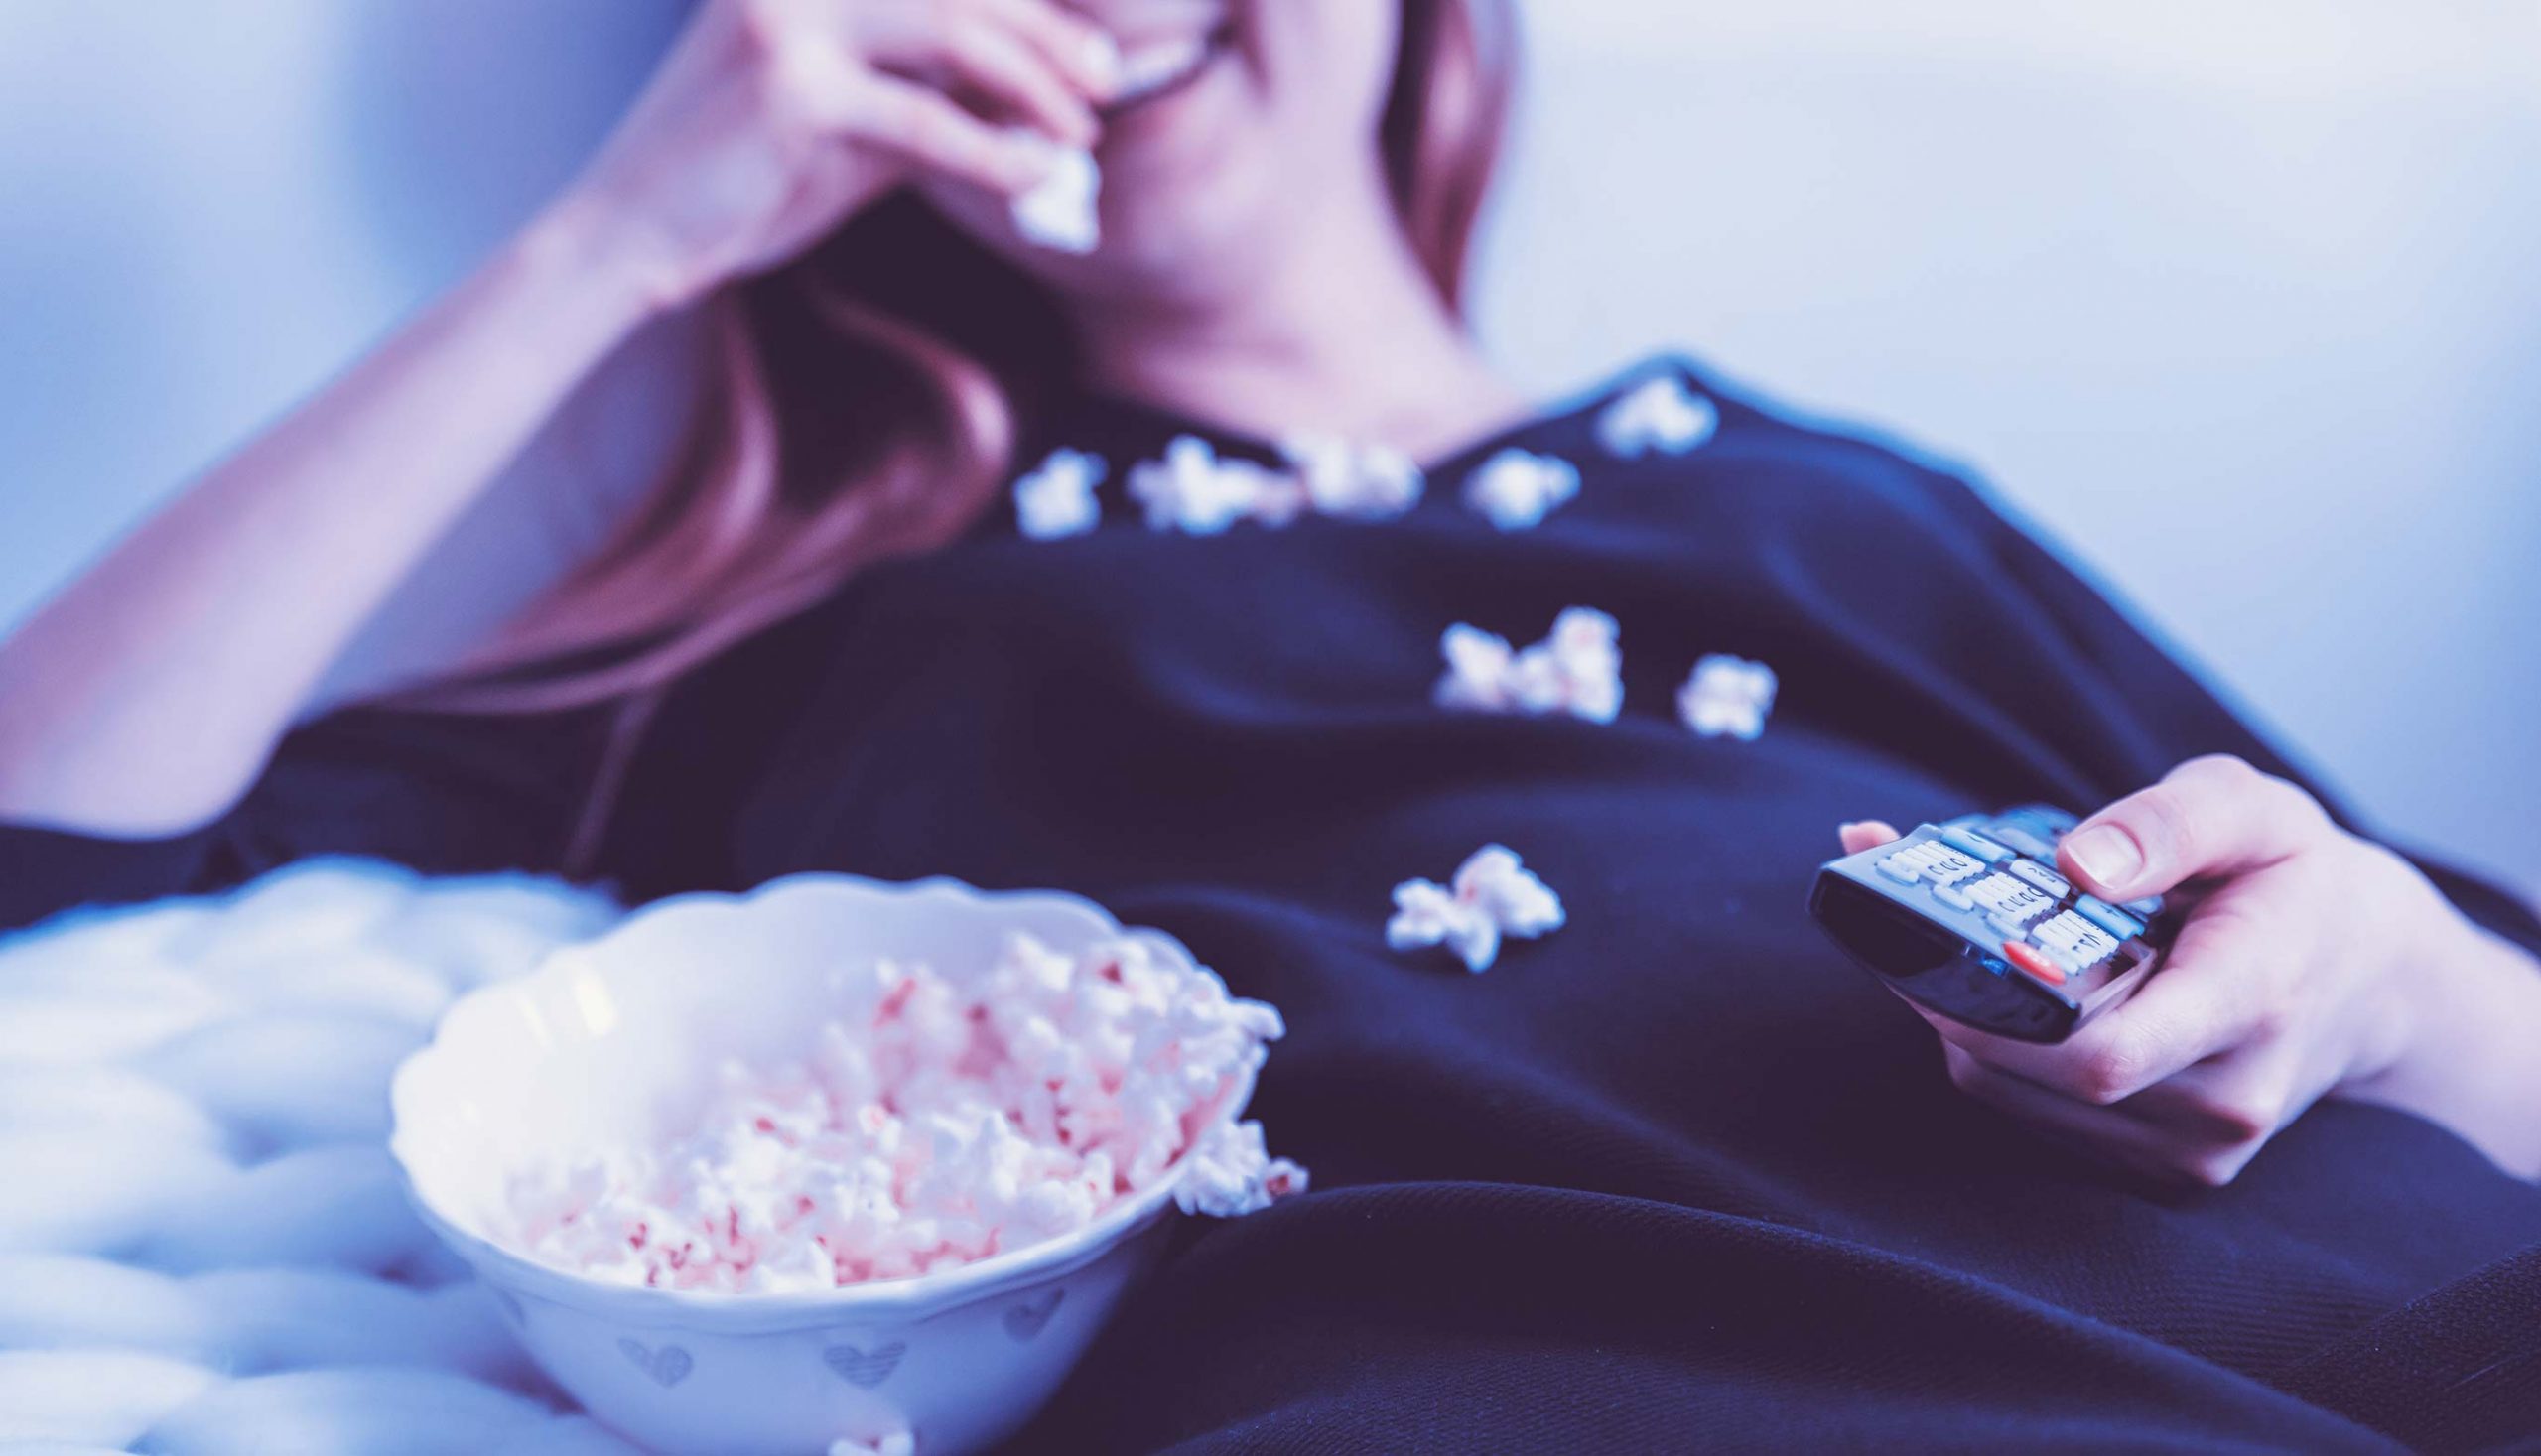 Snacking in front of the TV has its risks. Photo: JESHOOTS.COM / Unsplash